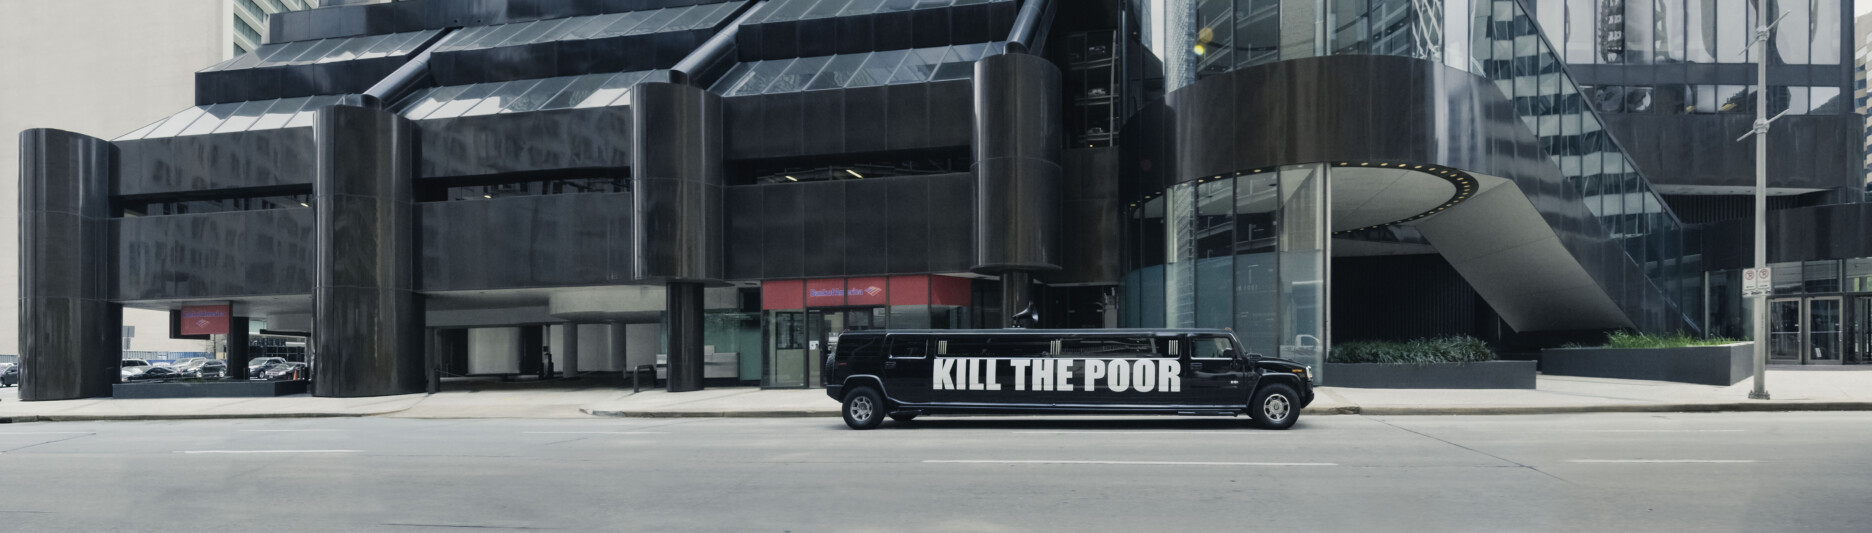 An artwork by Democracia from Act I of ORDER. This is a panoramic photo of a black stretch limo with the words KILL THE POOR in white on the side. The limo is moving through a city street in a financial district.